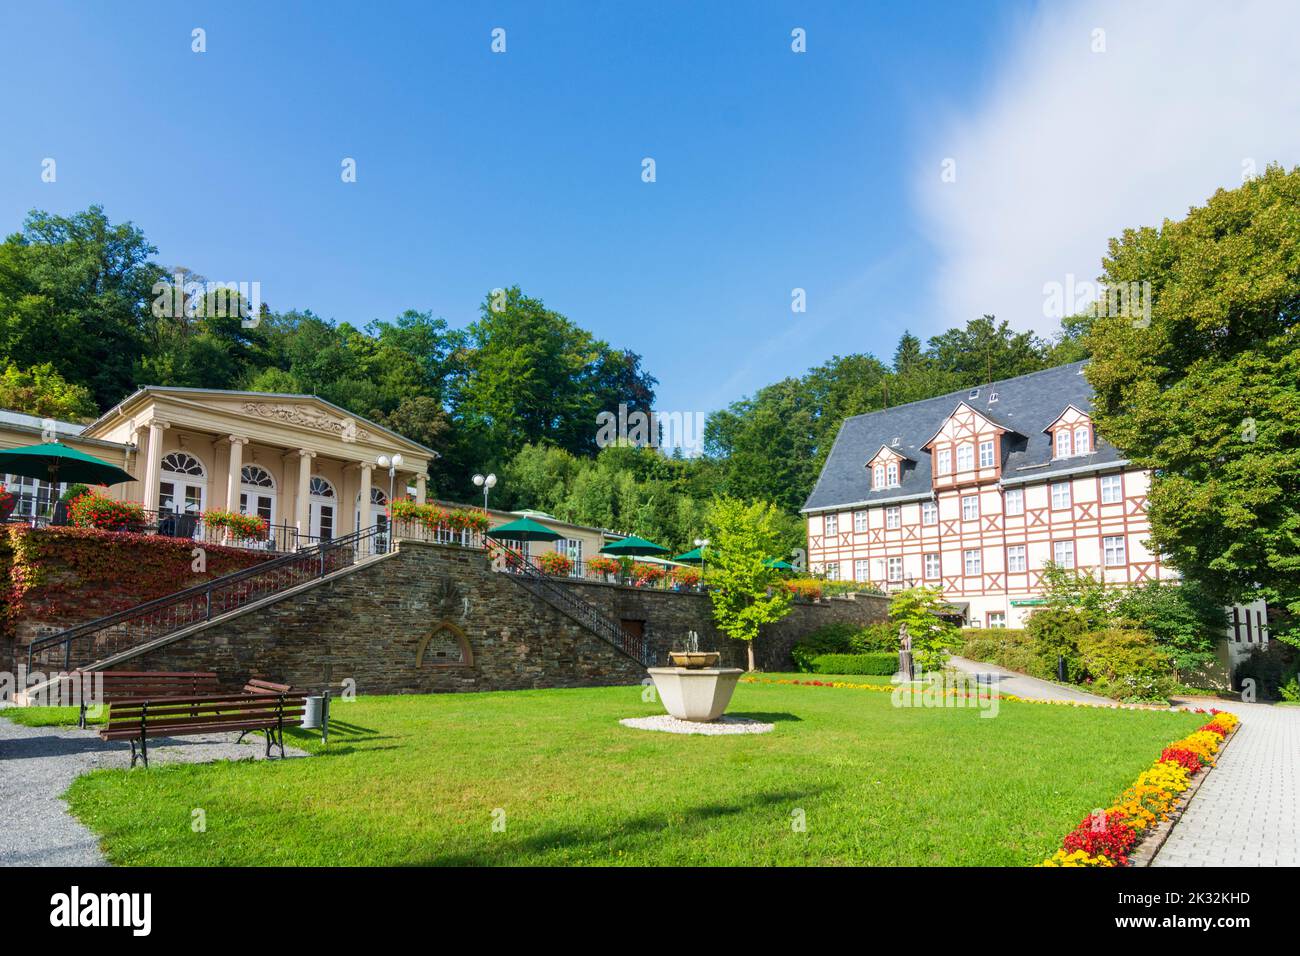 Thermalbad Wiesenbad: spa with Wandelhalle (foyer house), cafe in Erzgebirge, Ore Mountains, Sachsen, Saxony, Germany Stock Photo